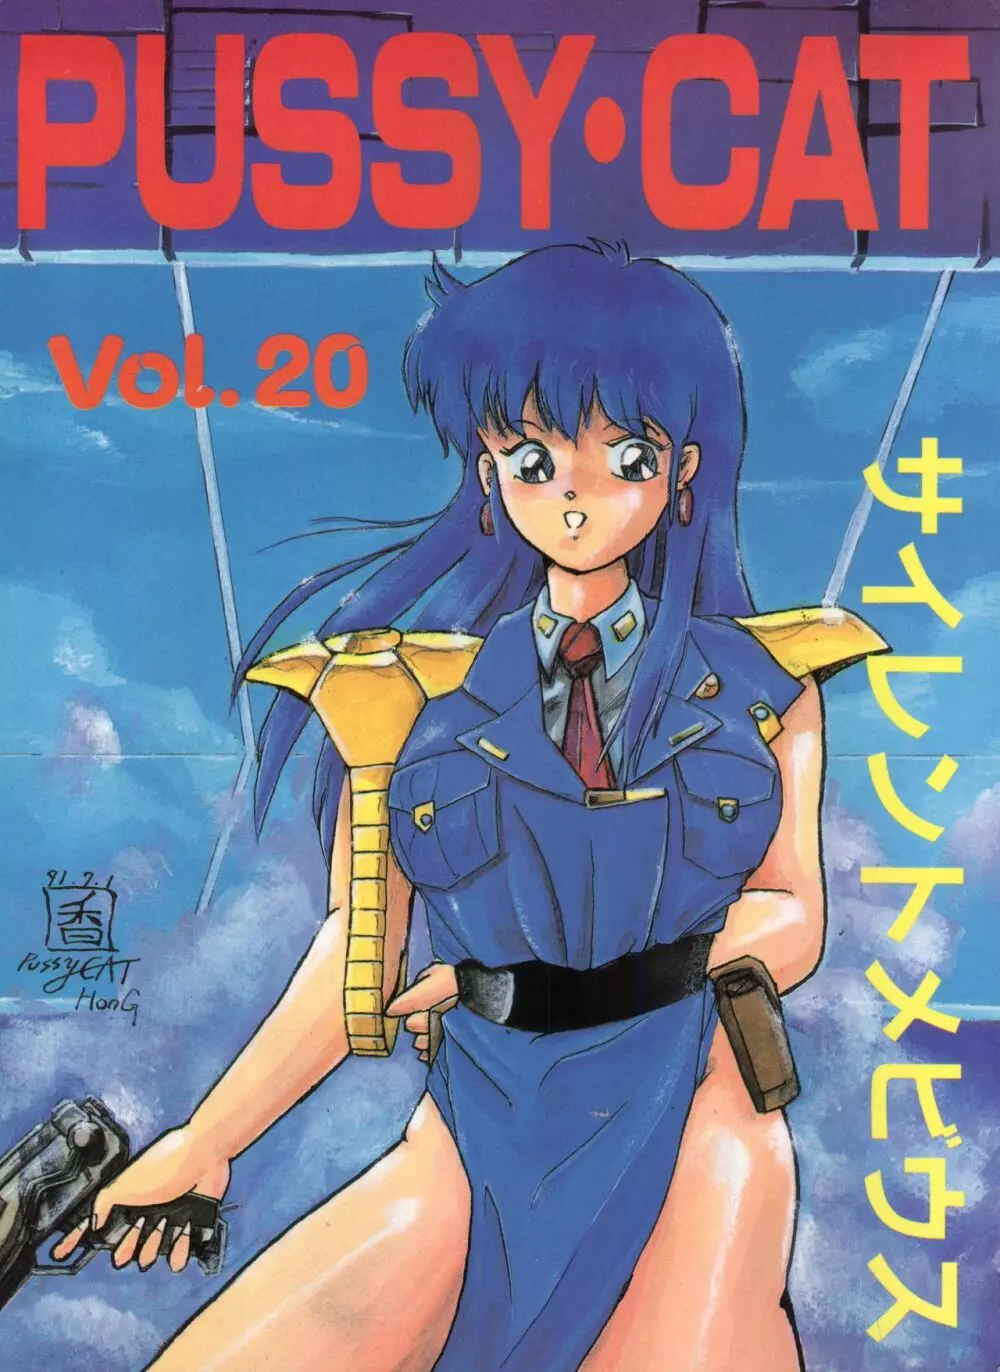 PUSSY・CAT Vol.20 サイレントメビウス